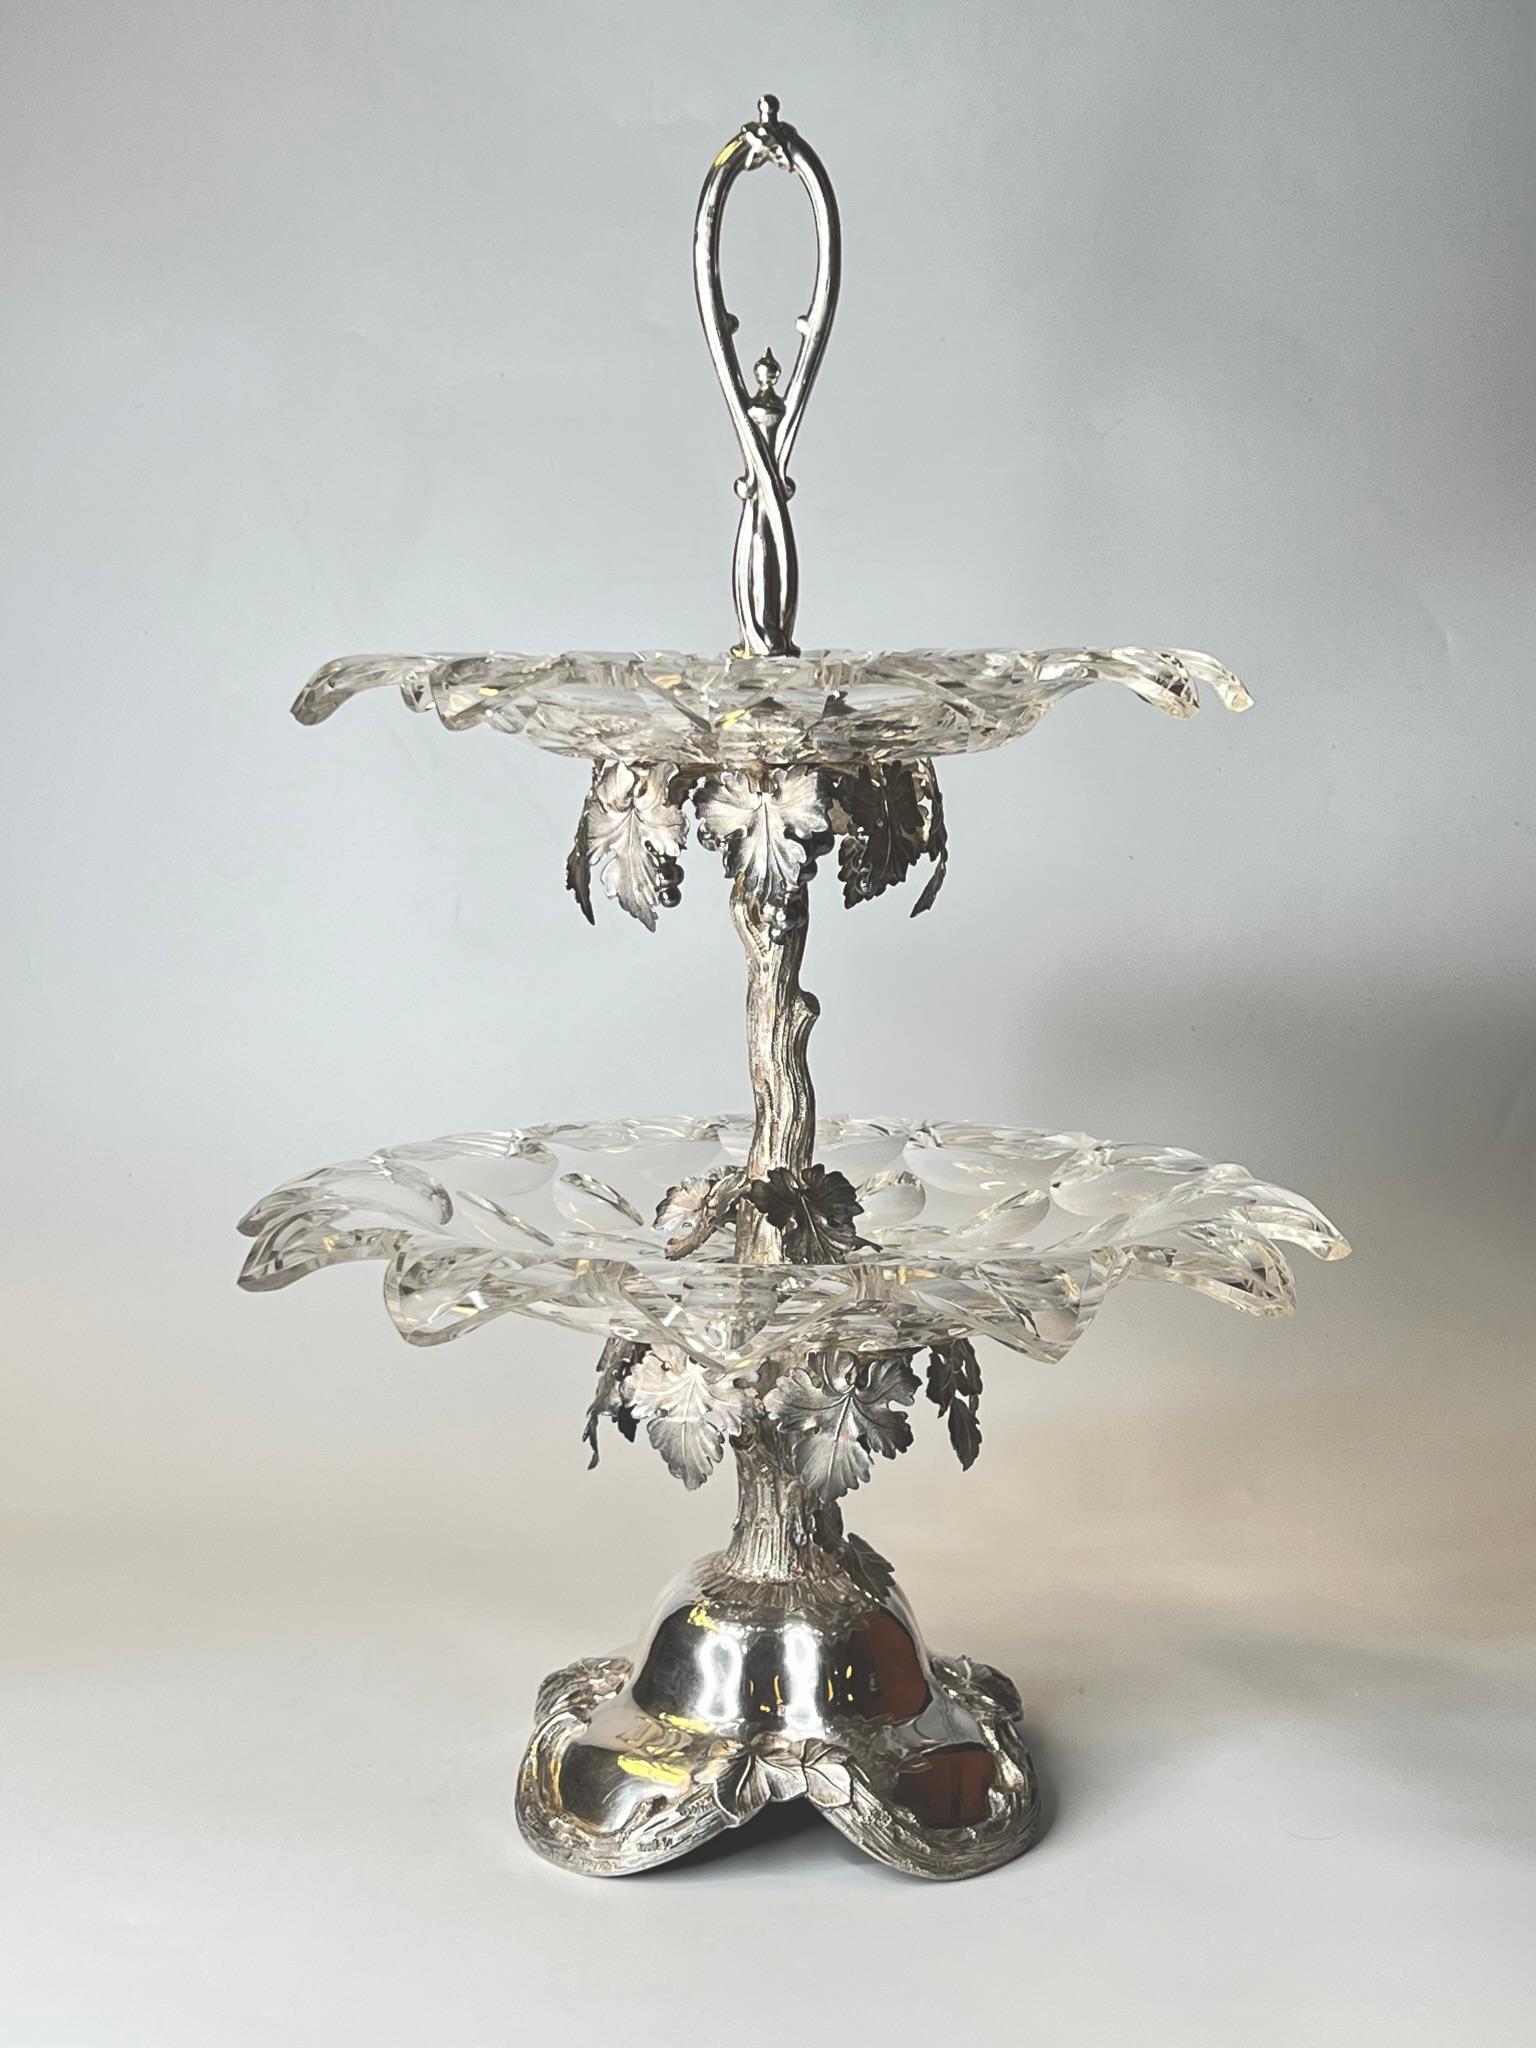 Our Dutch silver and cut glass dessert stand by J.M. van Kempen & Zoon features two finely cut glass dishes and exceptional vine and leaf designs. With lion rampant mark indicating .934 silver, and maker's mark.